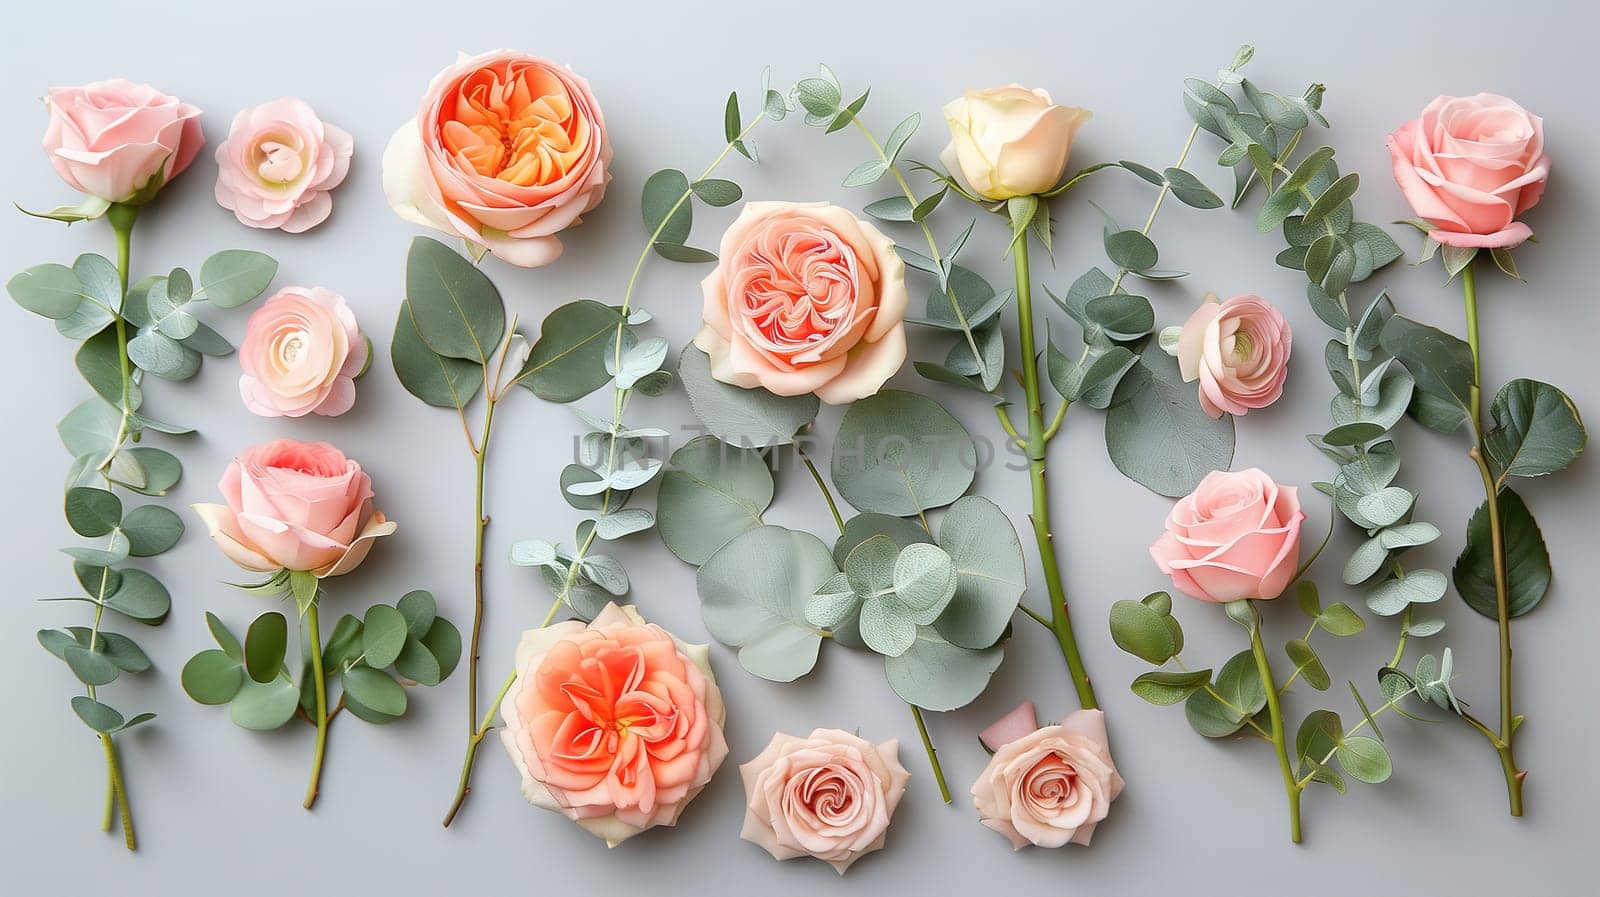 A collection of pink roses and eucalyptus leaves arranged together, showcasing the delicate beauty of the flowers against the greenery of the leaves. This grouping exudes a sense of elegance and natural harmony.